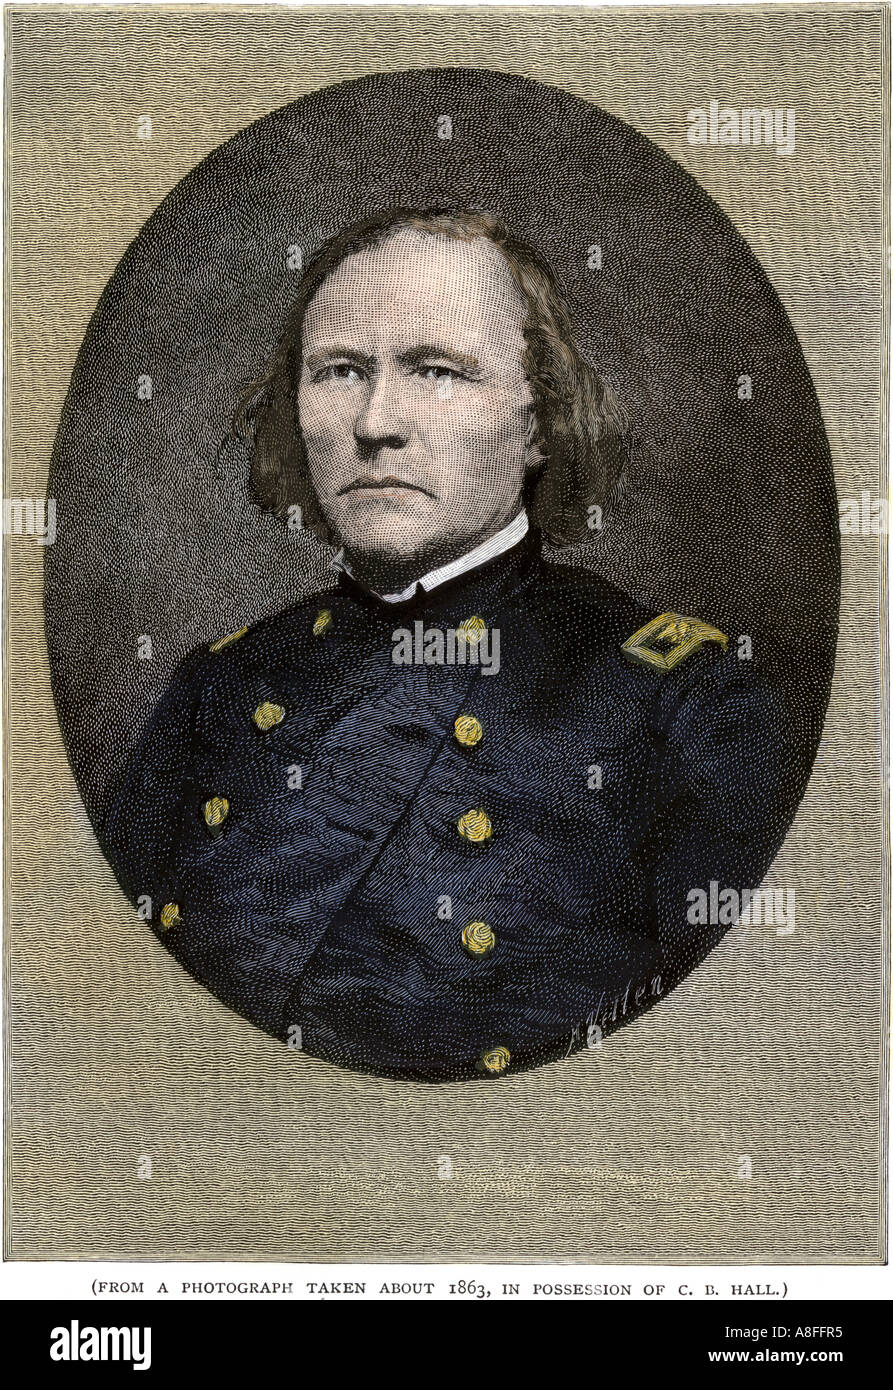 Christopher Kit Carson as commander of First New Mexico Volunteers in the US Civil War. Hand-colored woodcut Stock Photo